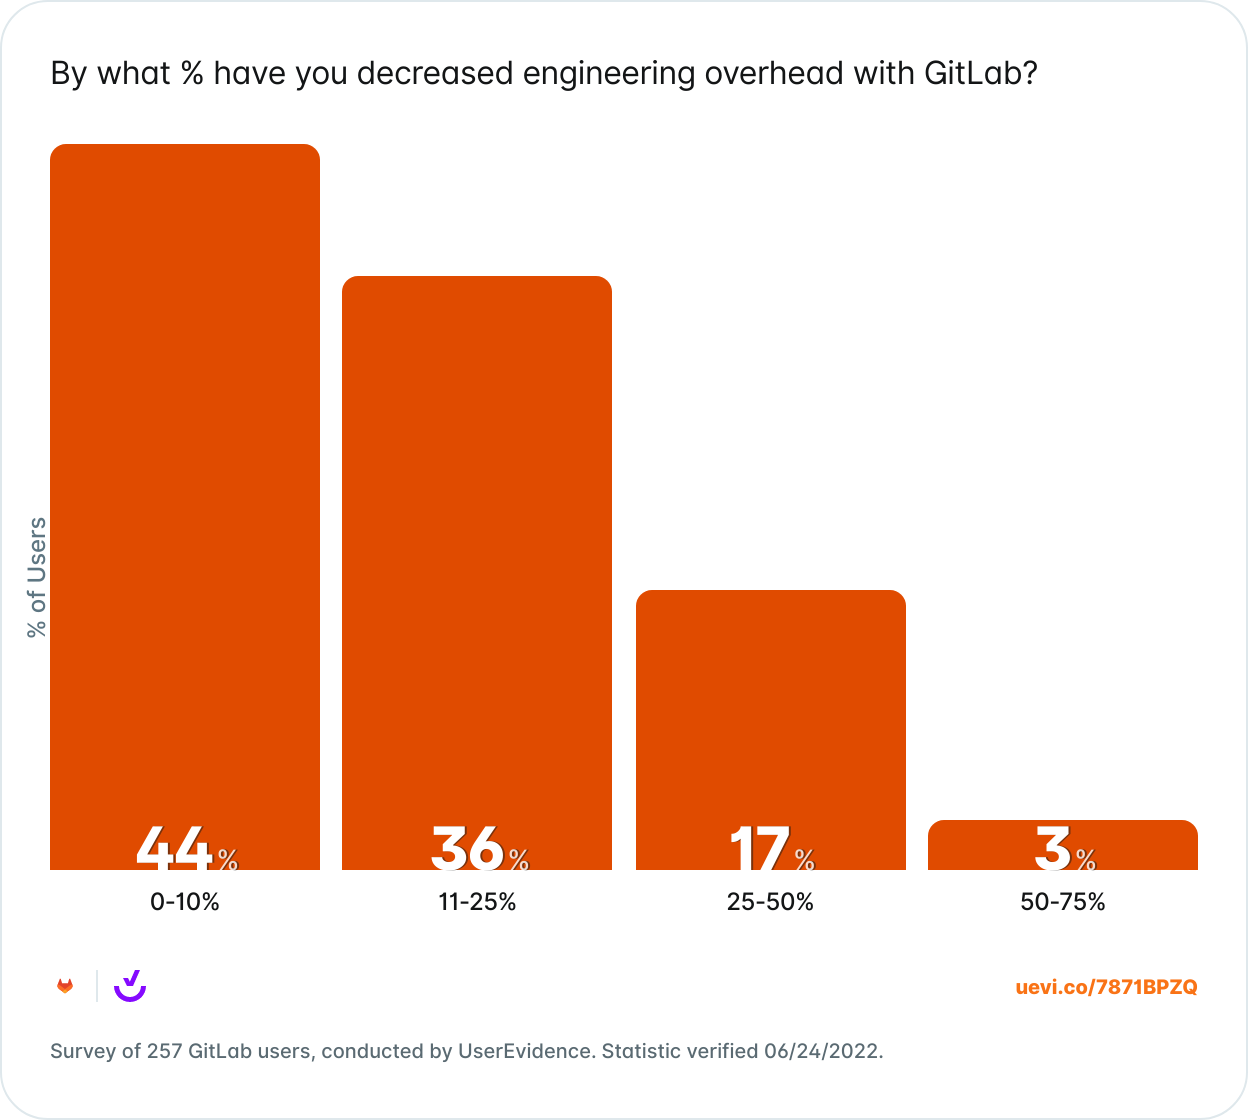 GitLab simply sent out a survey to their current customers asking how much they have decreased their engineering overhead by working with GitLab.